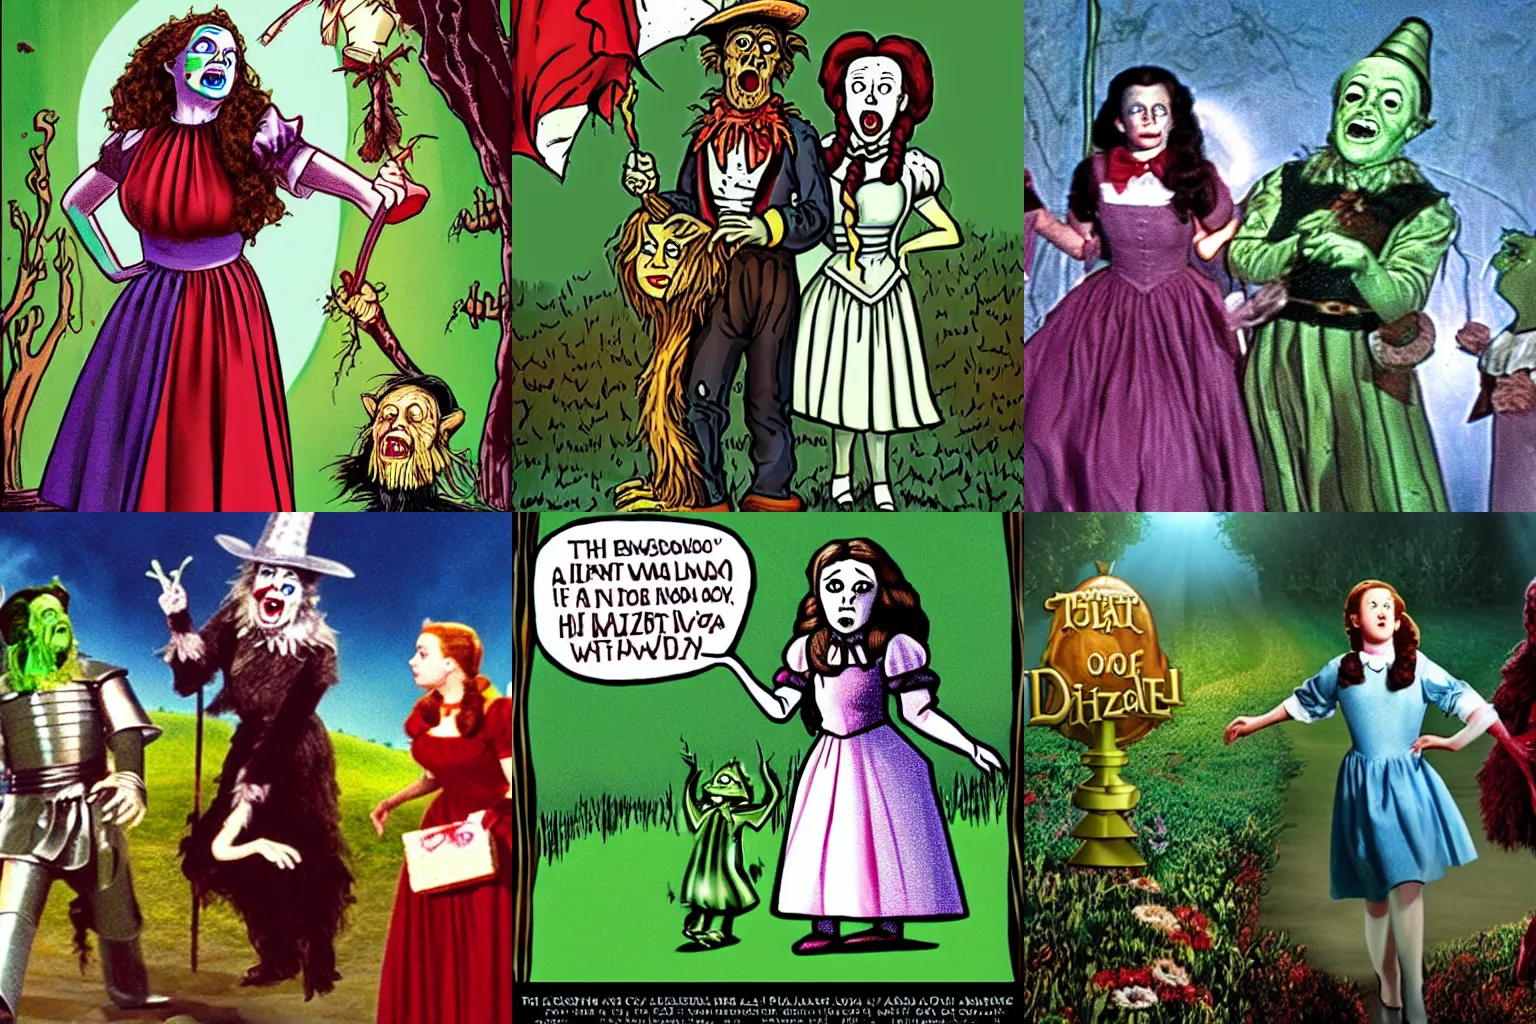 Prompt: The Wizard of Oz with a zombie Dorothy, Wizard of Oz parody